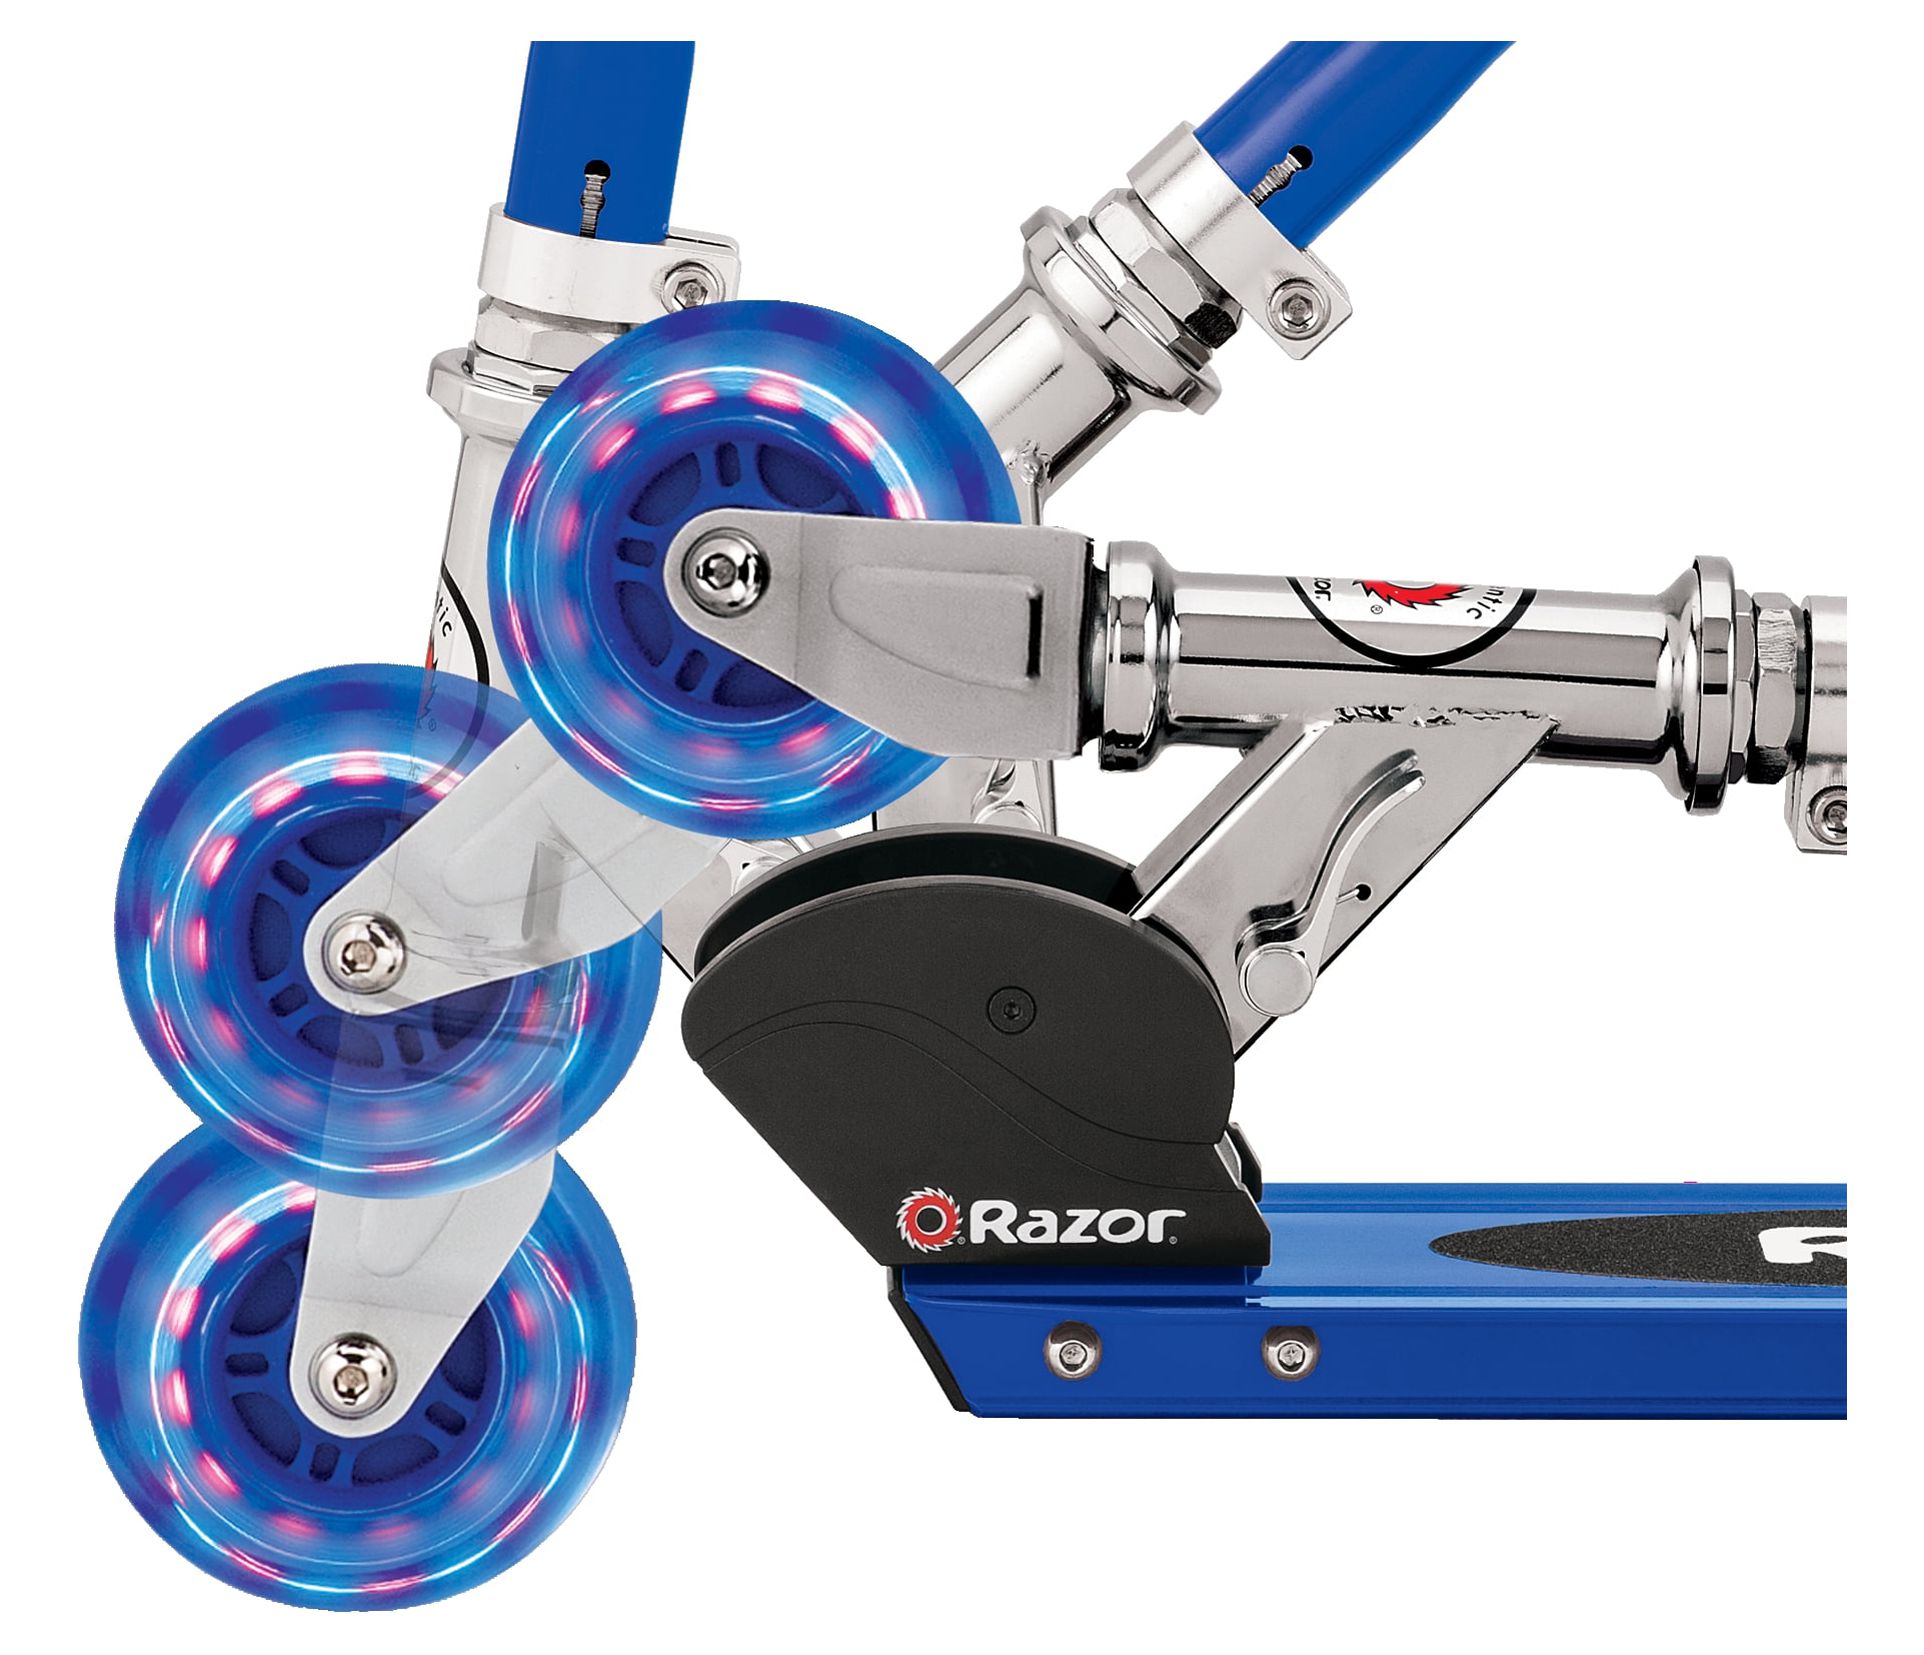 Razor S Folding Kick Scooter with Light-Up Wheel - Blue, for Kids Ages 5+ and up to 110 lbs - image 5 of 10